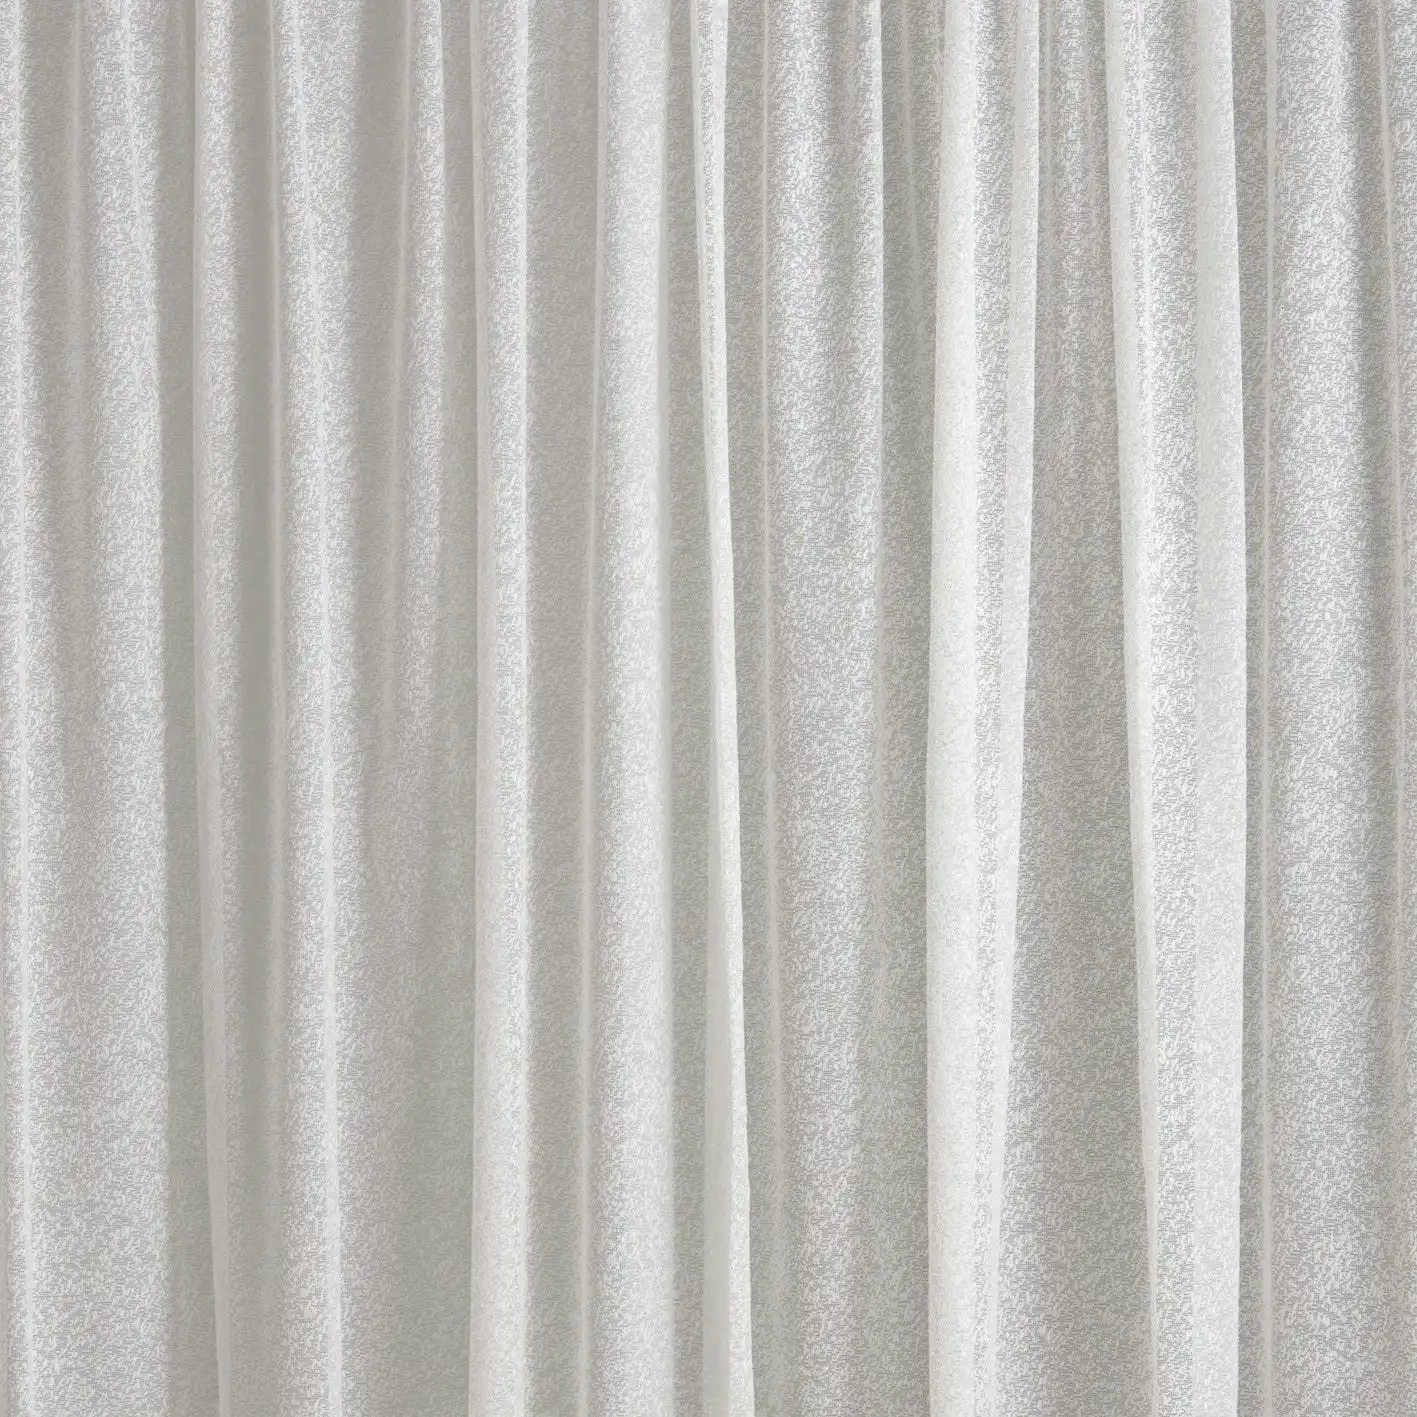 Boucle Lace Curtain Fabric, White